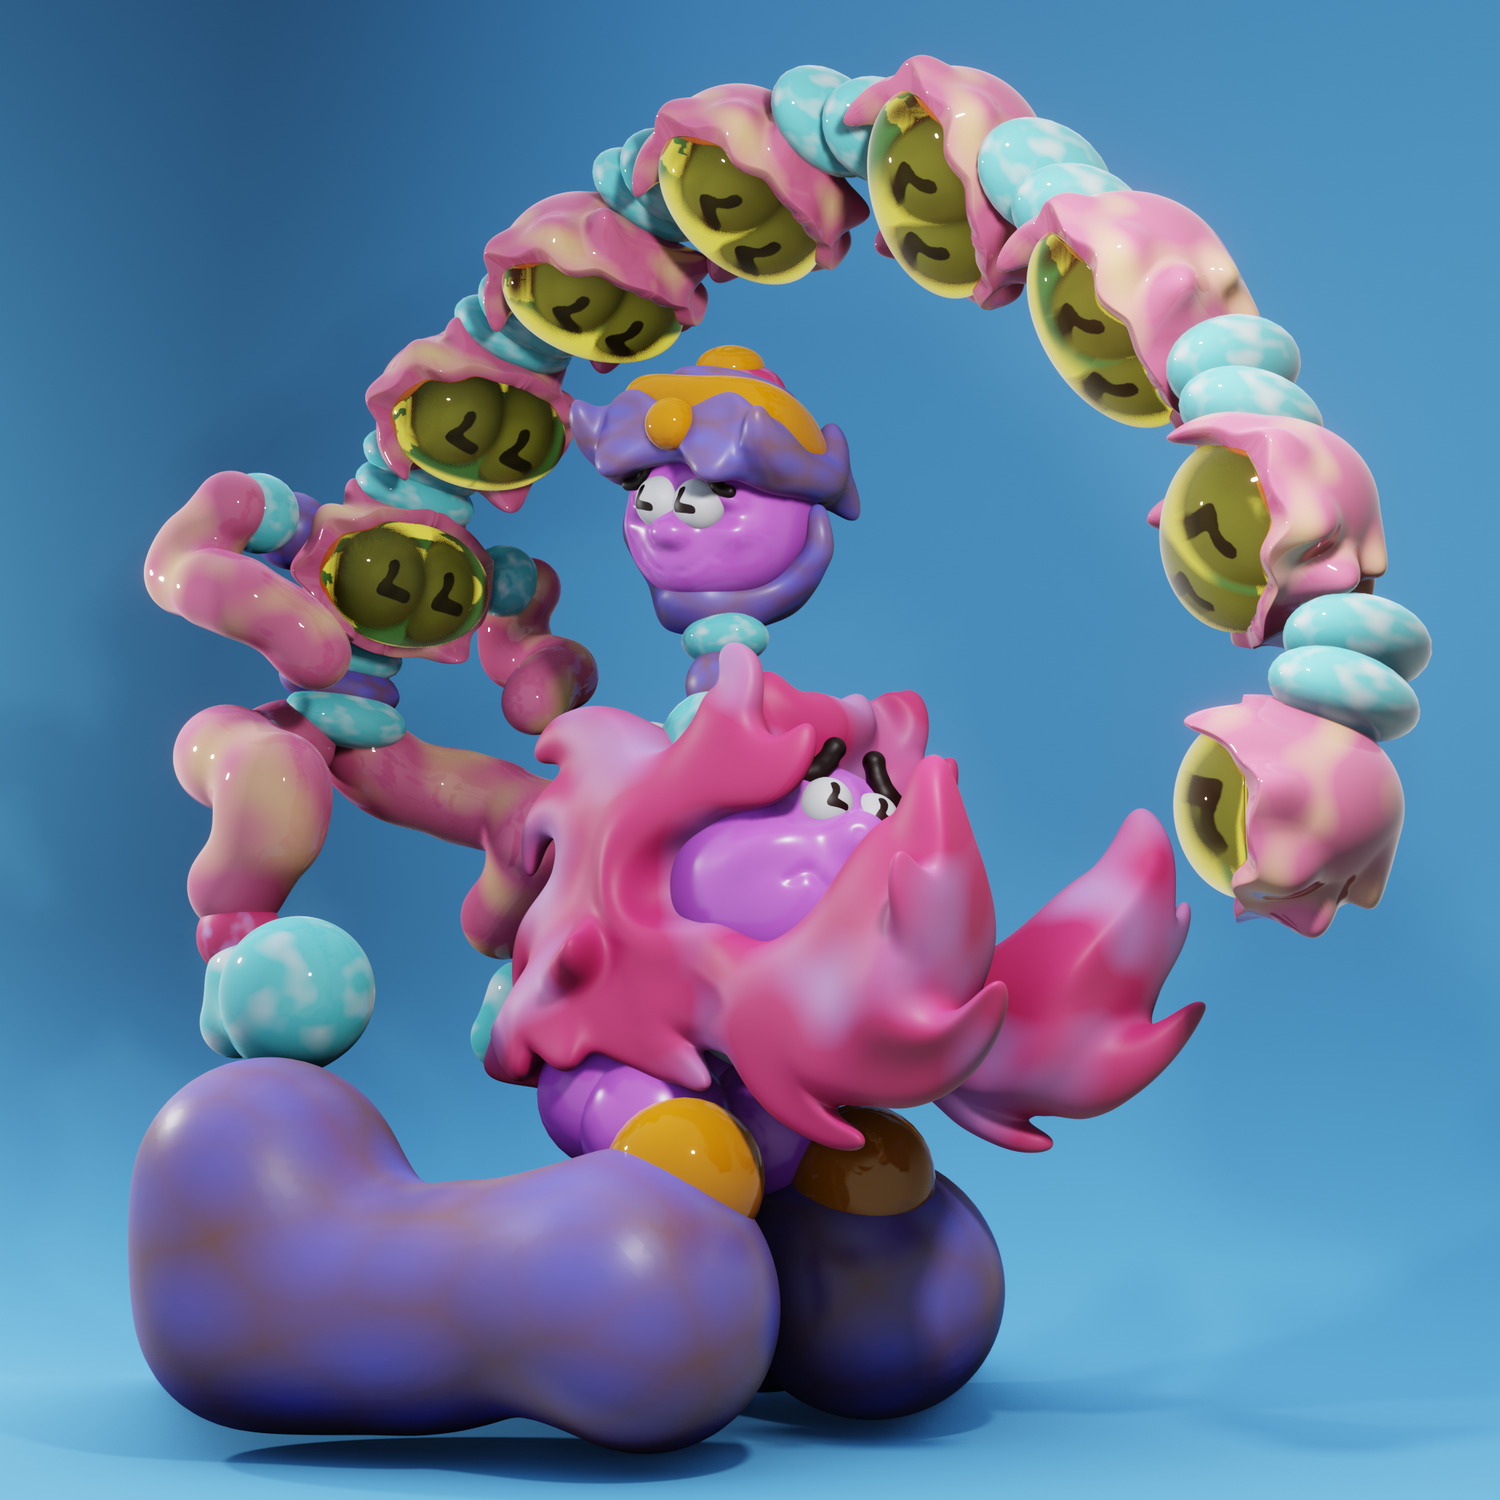 Sam Wood's absurd and colorful 3D world 9